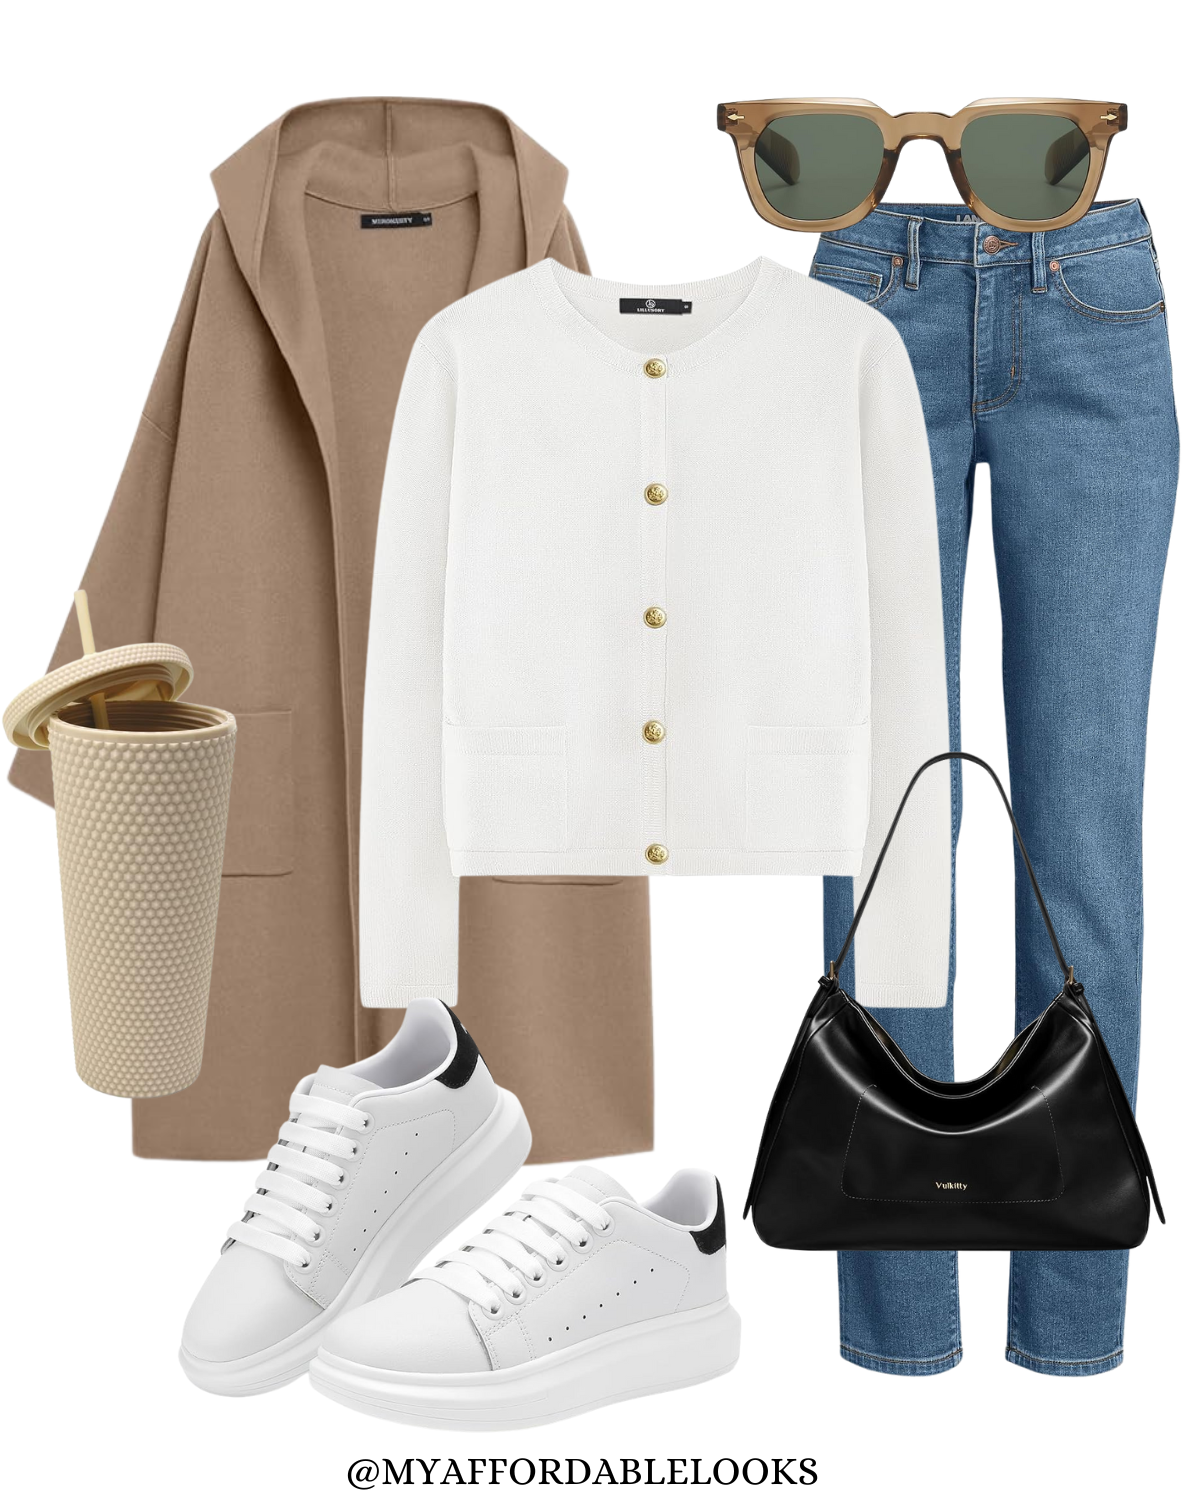 Outfit Ideas to Get You Through the Rest of Winter